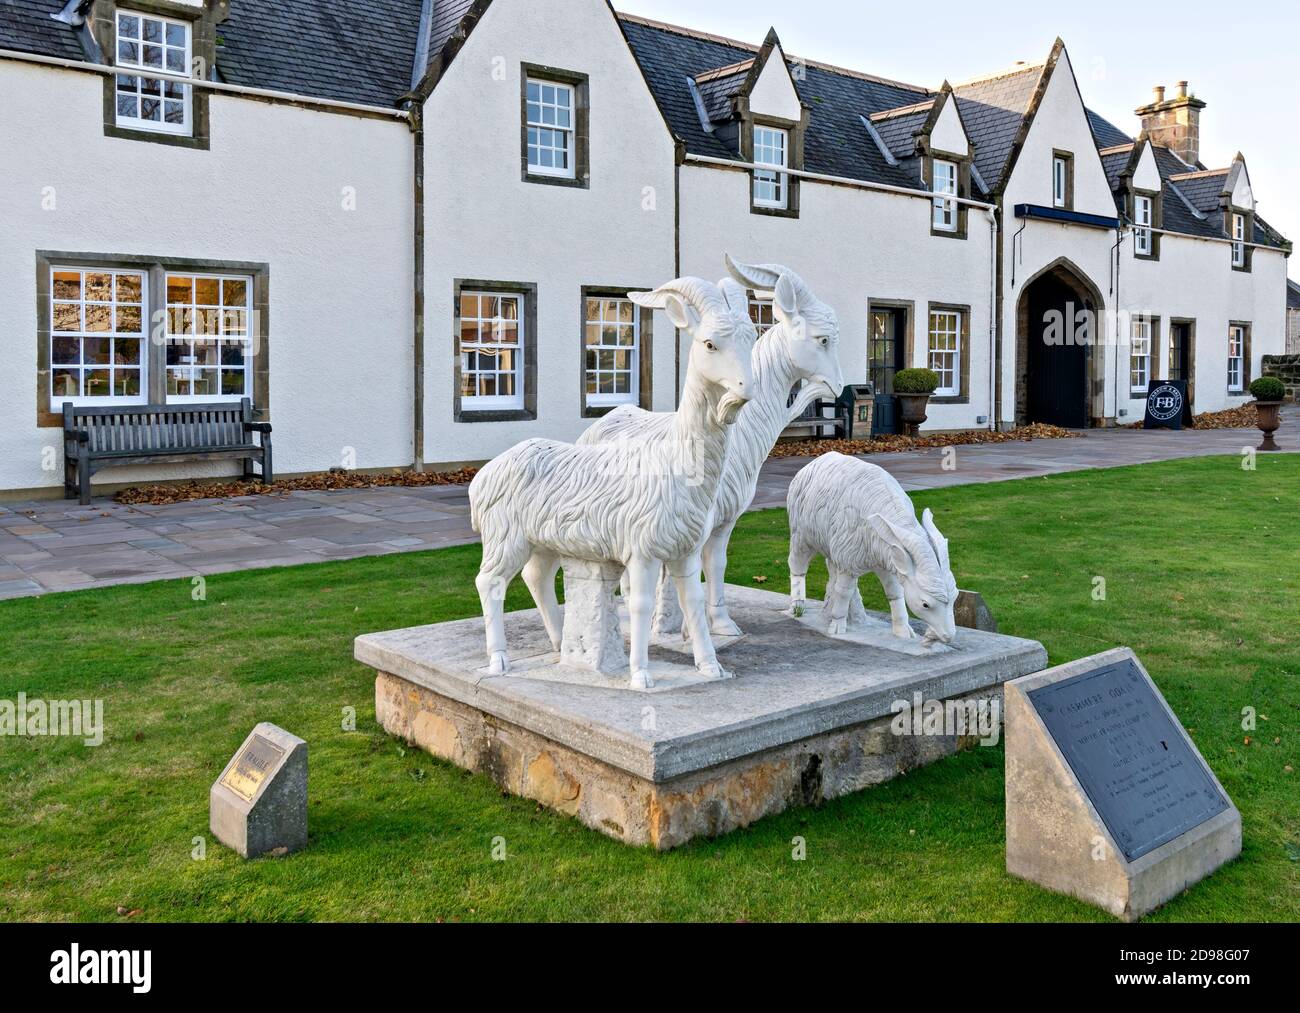 JOHNSTONS OF ELGIN MORAY SCOTLAND CASHMERE AND FINE WOOLLENS MILL THE SCULPTURE OF CASHMERE GOATS Stock Photo